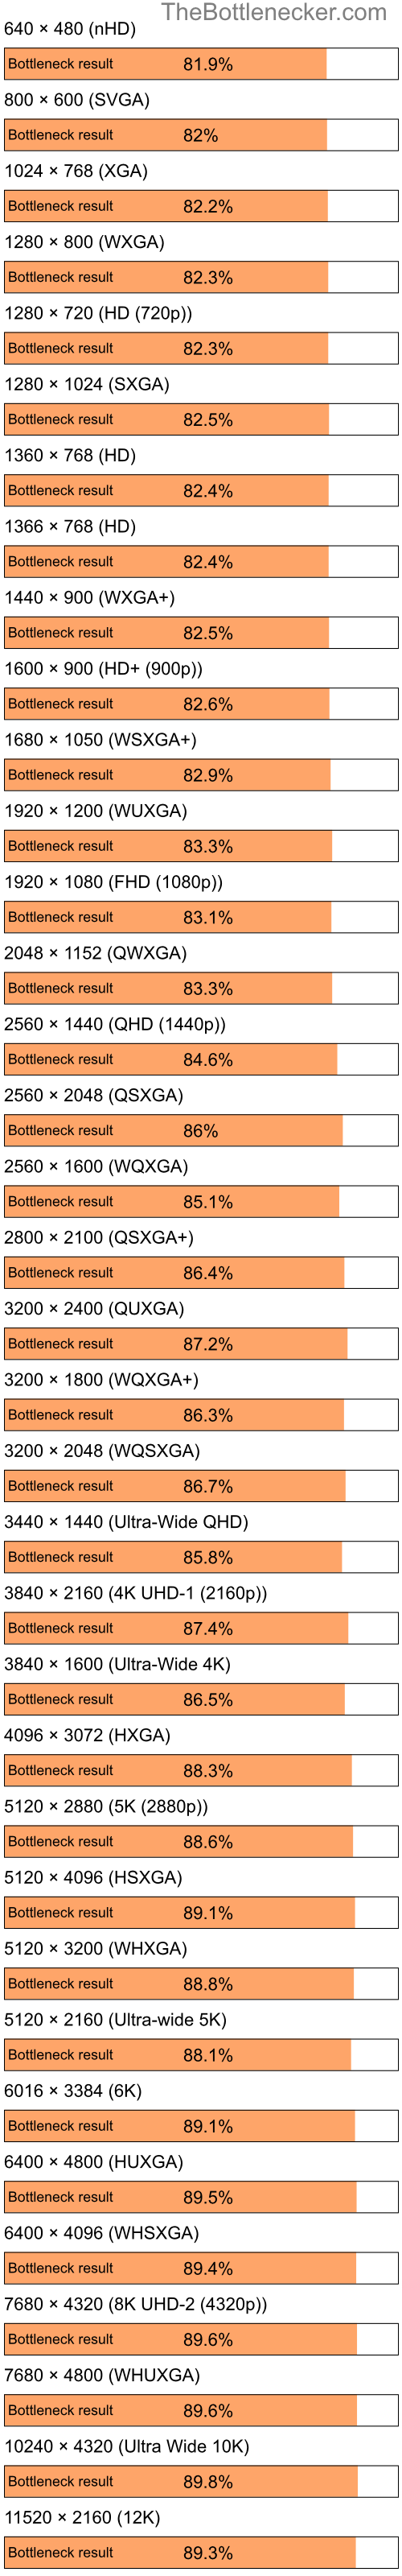 Bottleneck results by resolution for Intel Celeron and NVIDIA GeForce nForce 630a in Graphic Card Intense Tasks